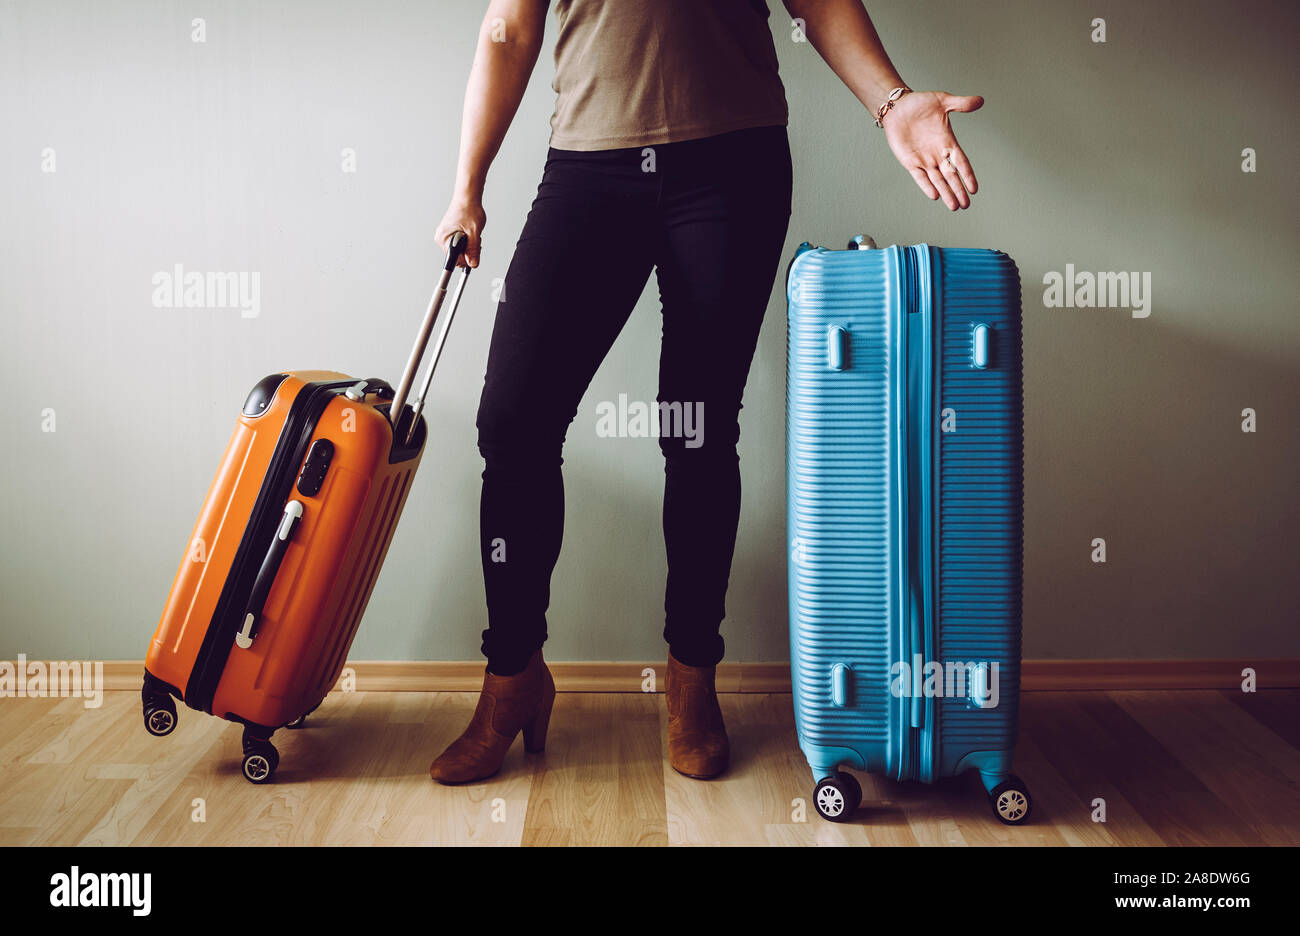 Confused air passenger standing with luggage, stranded in airport. Traveling agency bankruptcy concept. Stock Photo